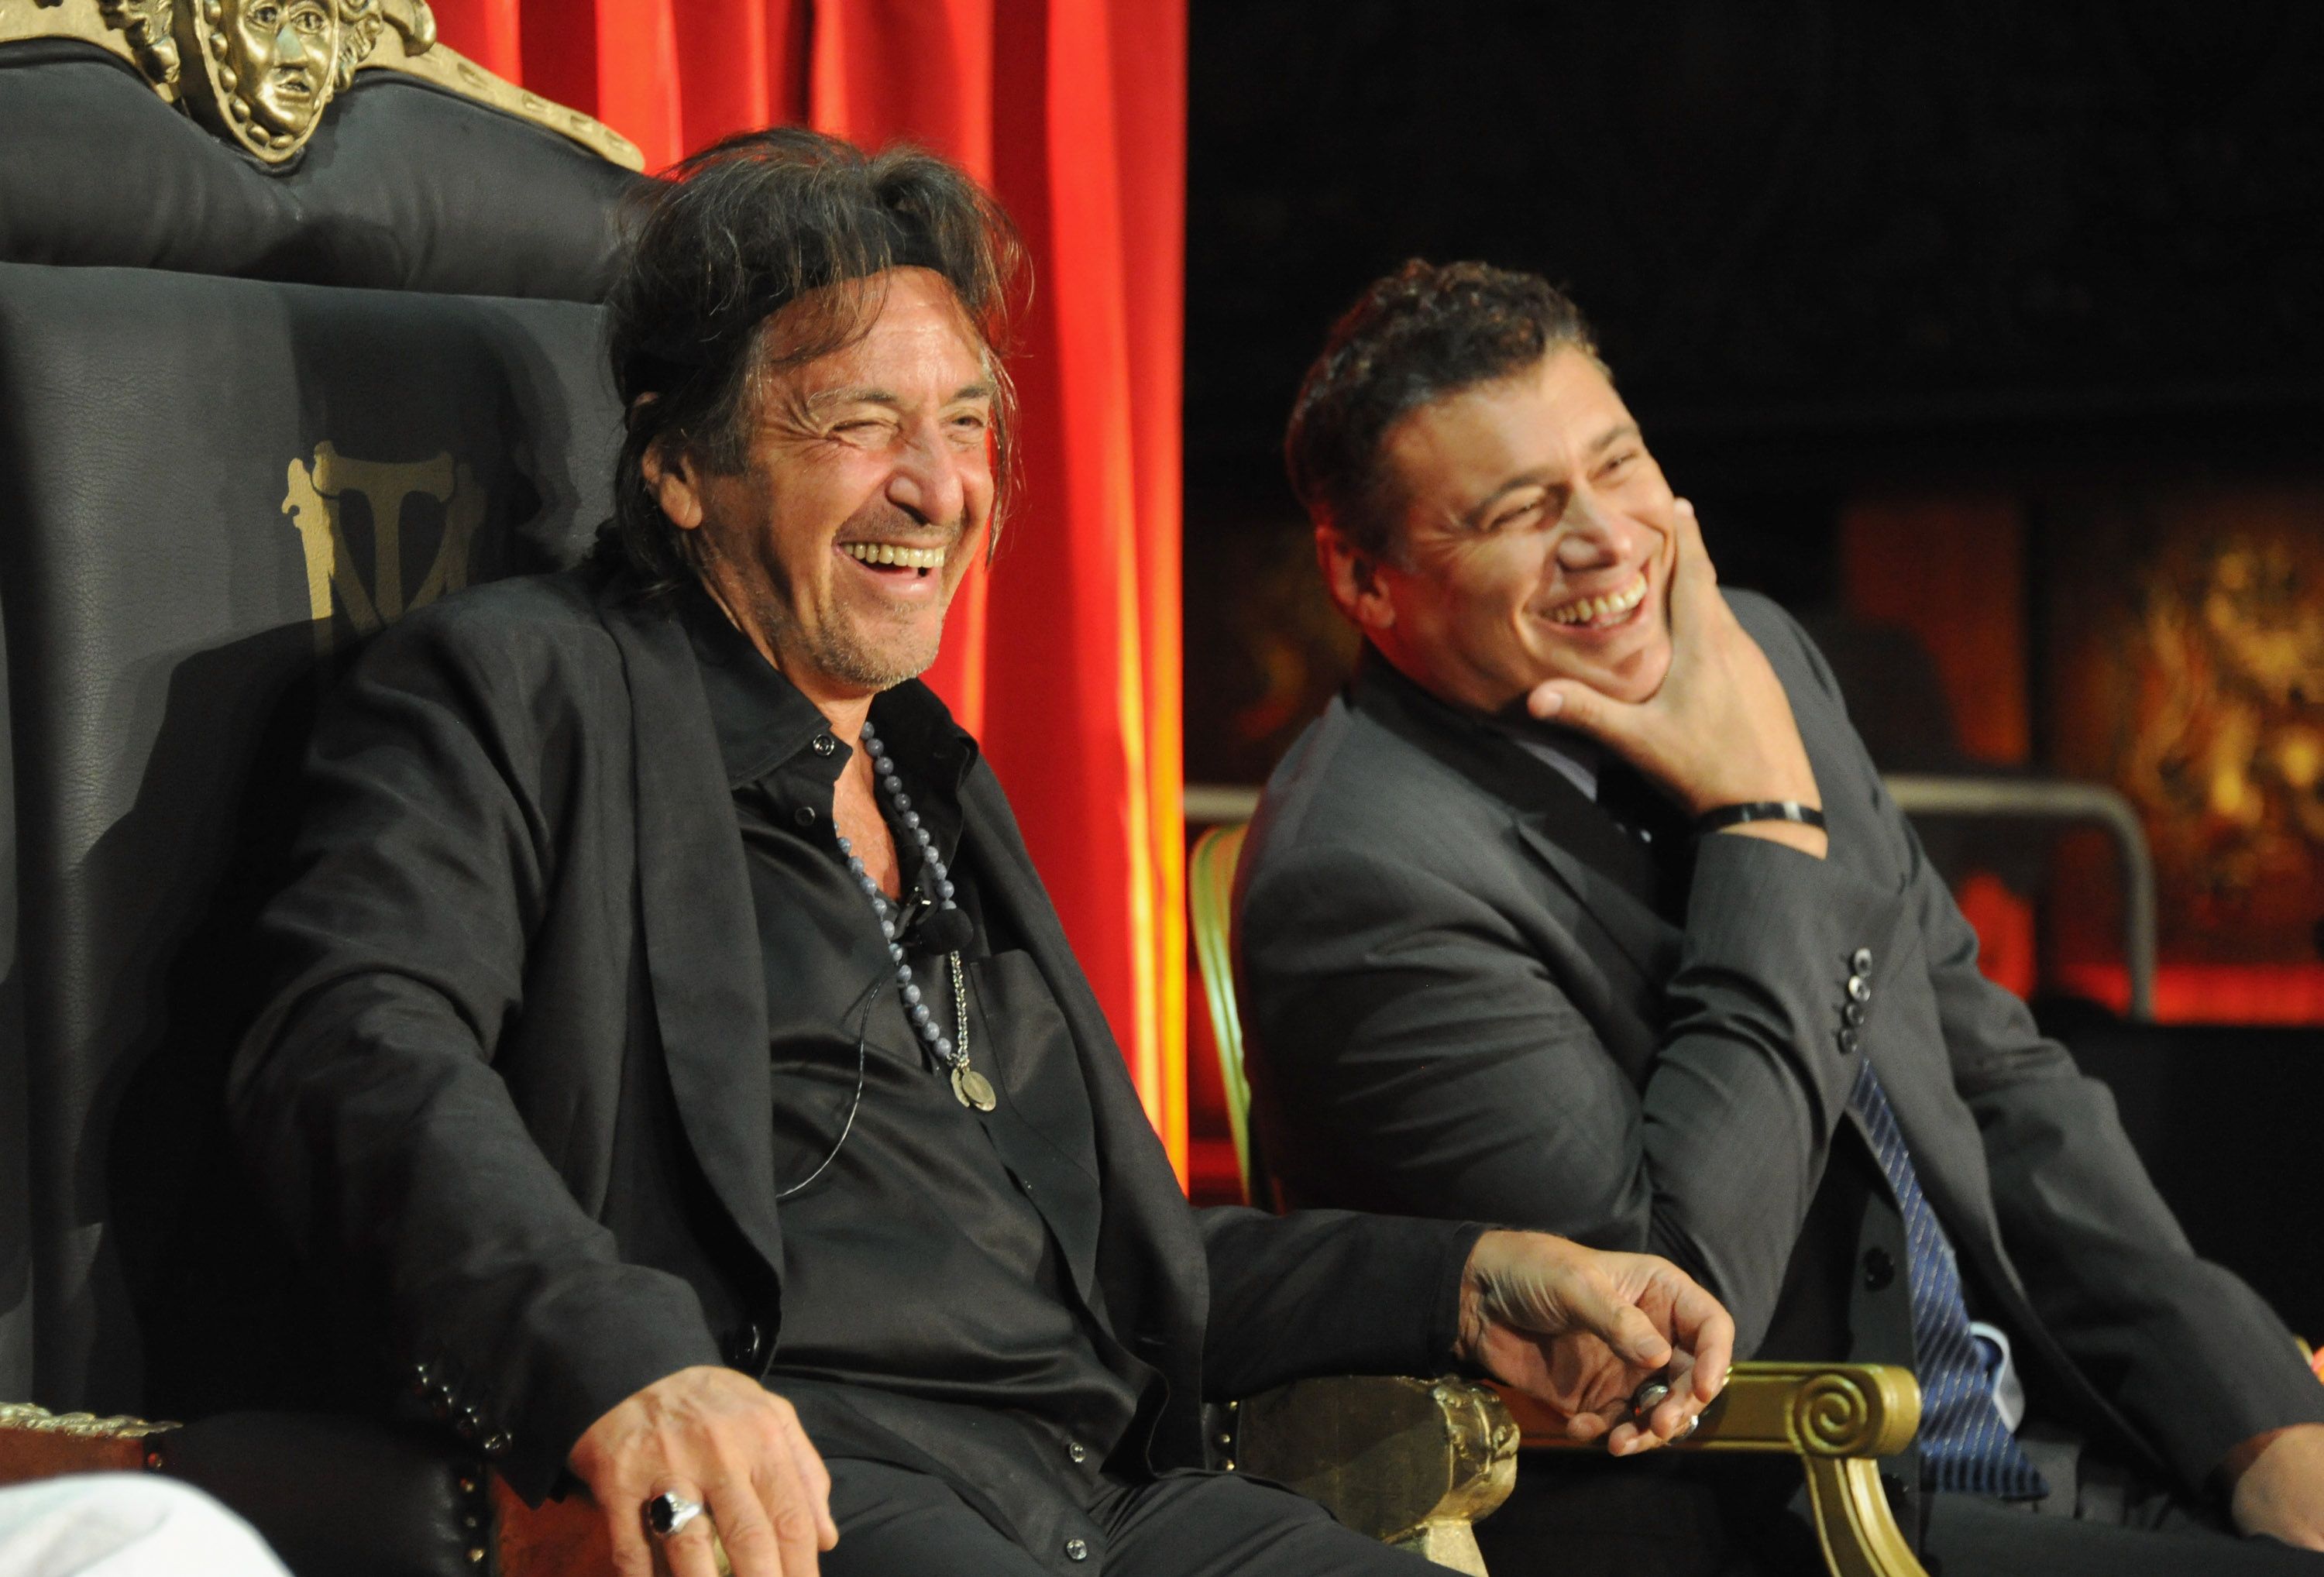 Al Pacino and Steven Bauer share a laugh at the Scarface Blu-ray partyThe actor also thanked his Dog Day Afternoon director {20}, who came up with the idea for the movie to begin with Tony Montana first arriving to America on a raft. {21} also said that he feels a special connection to {22} because there were no sequels or further remakes after this legendary version.